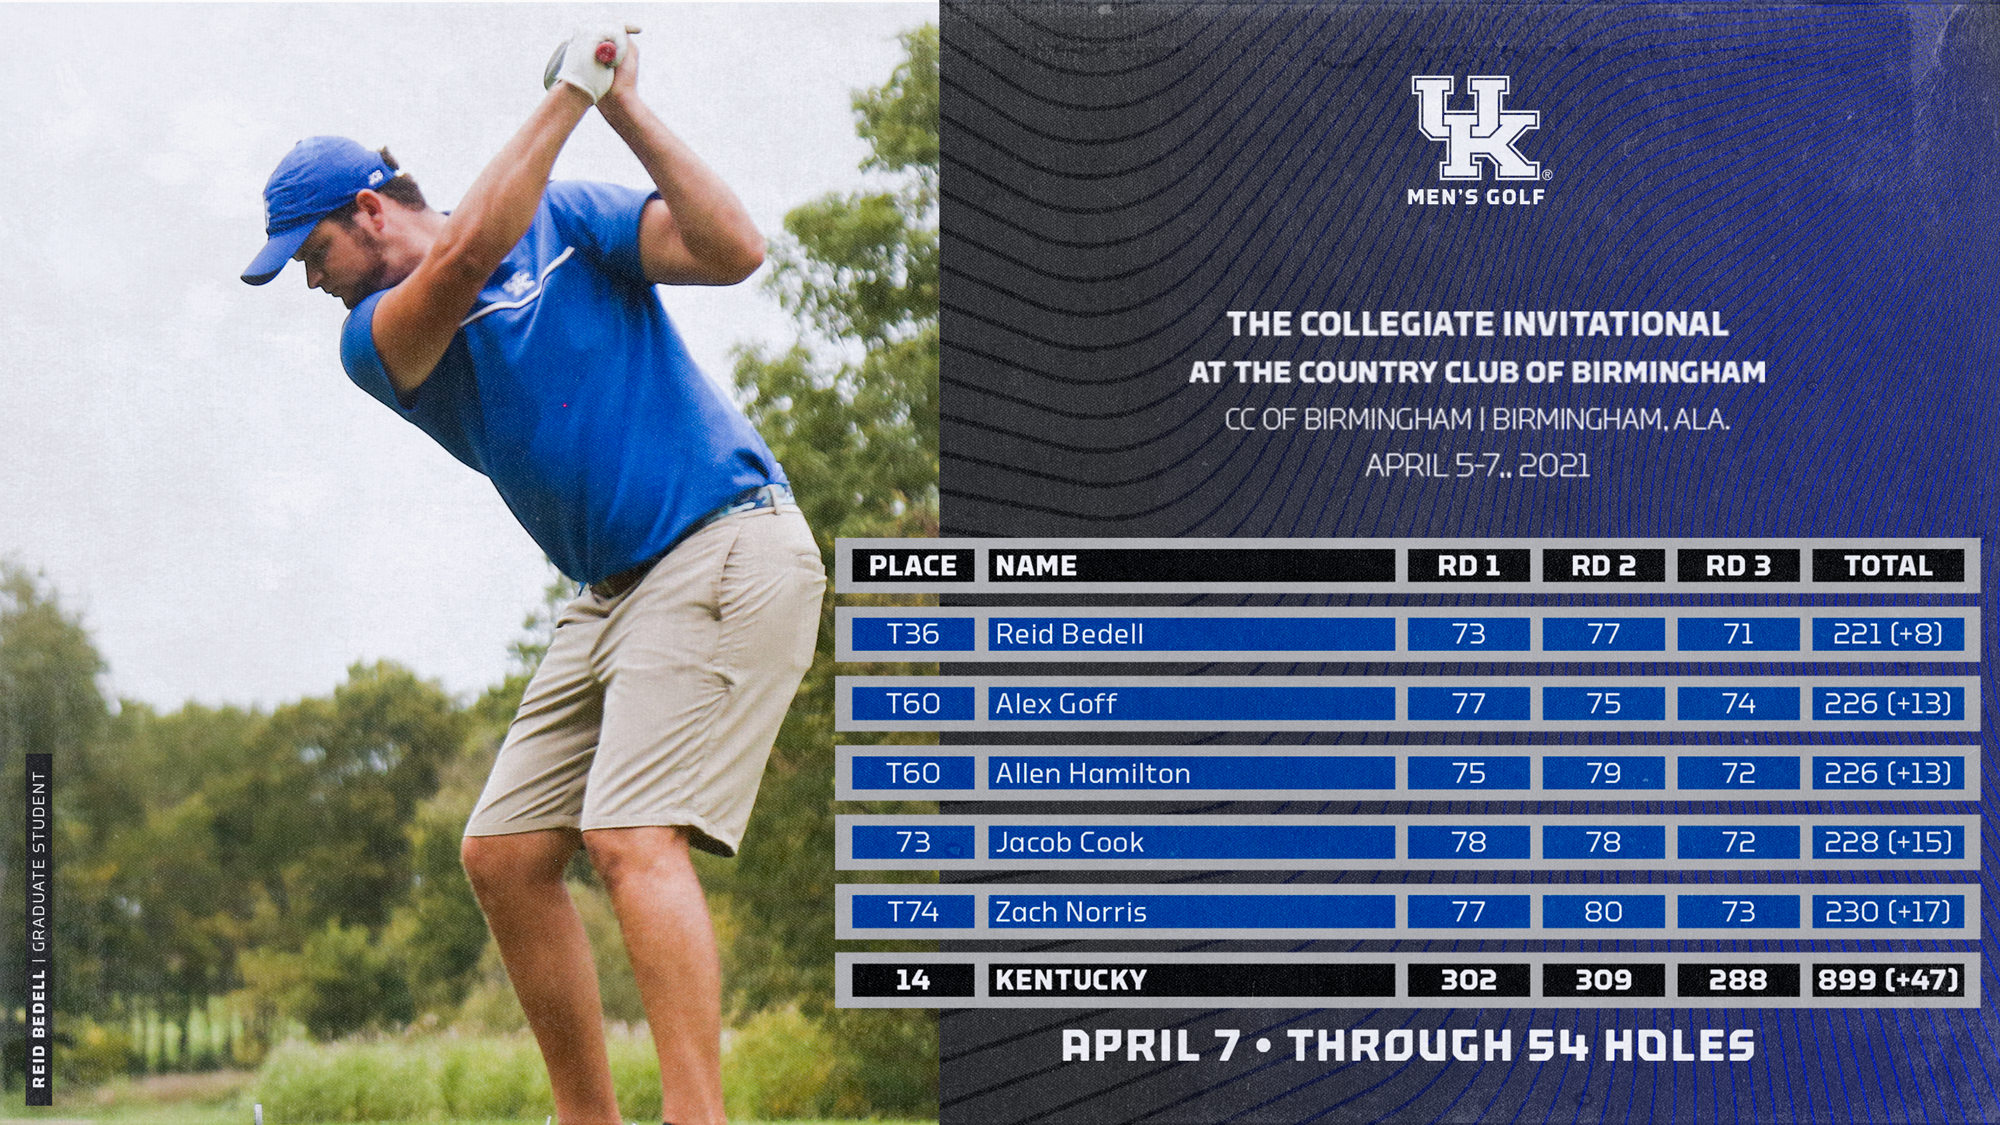 Wildcats Shoot Lowest Score of the Week During Final Round